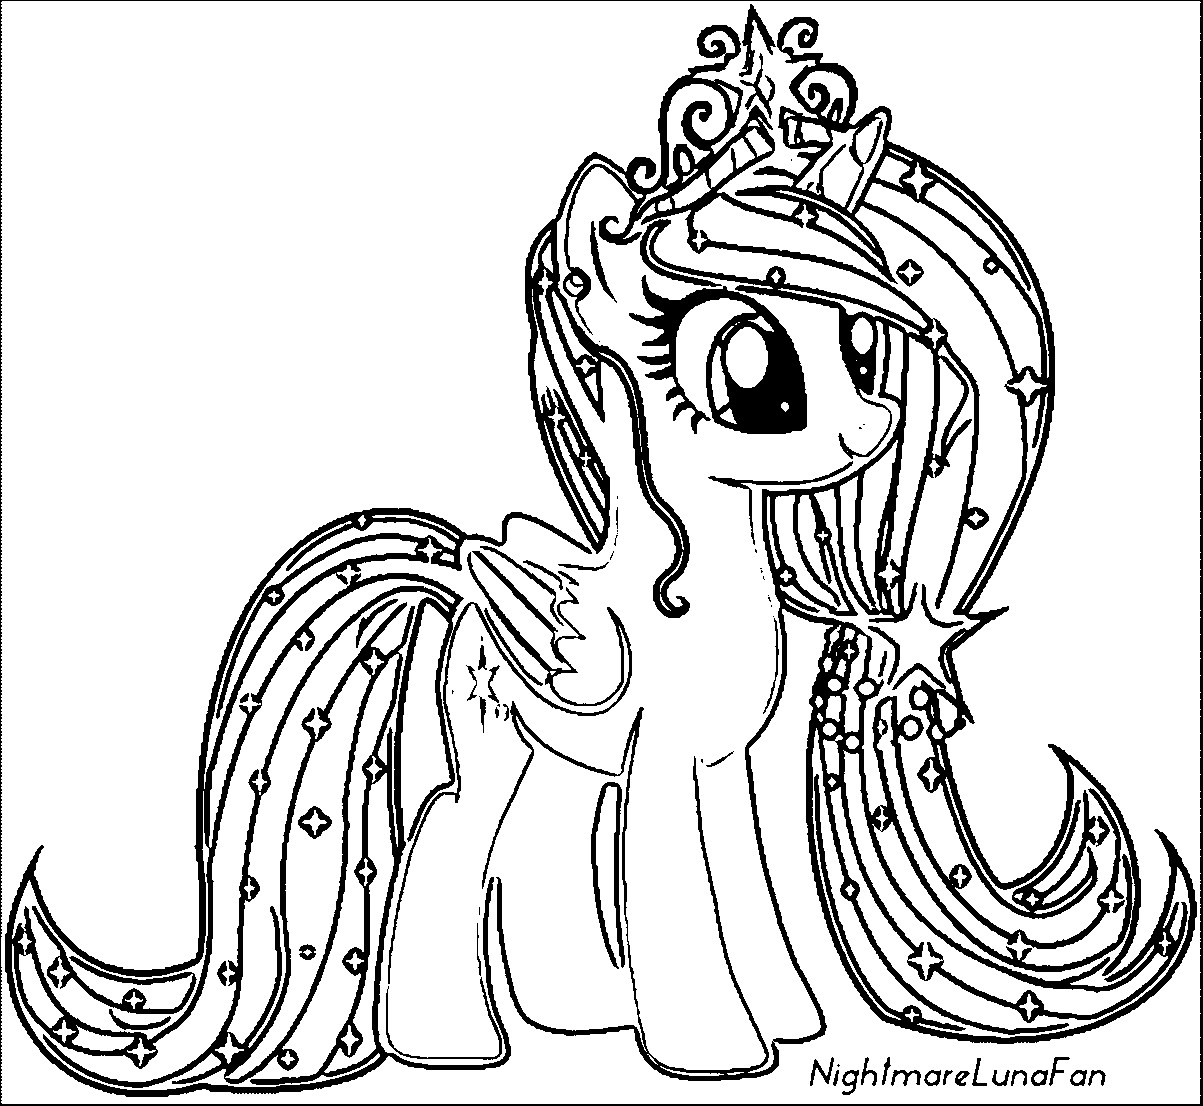 Coloring Sheets For Girls Mlp
 My Little Pony Coloring Pages Rainbow Dash Equestria Girls